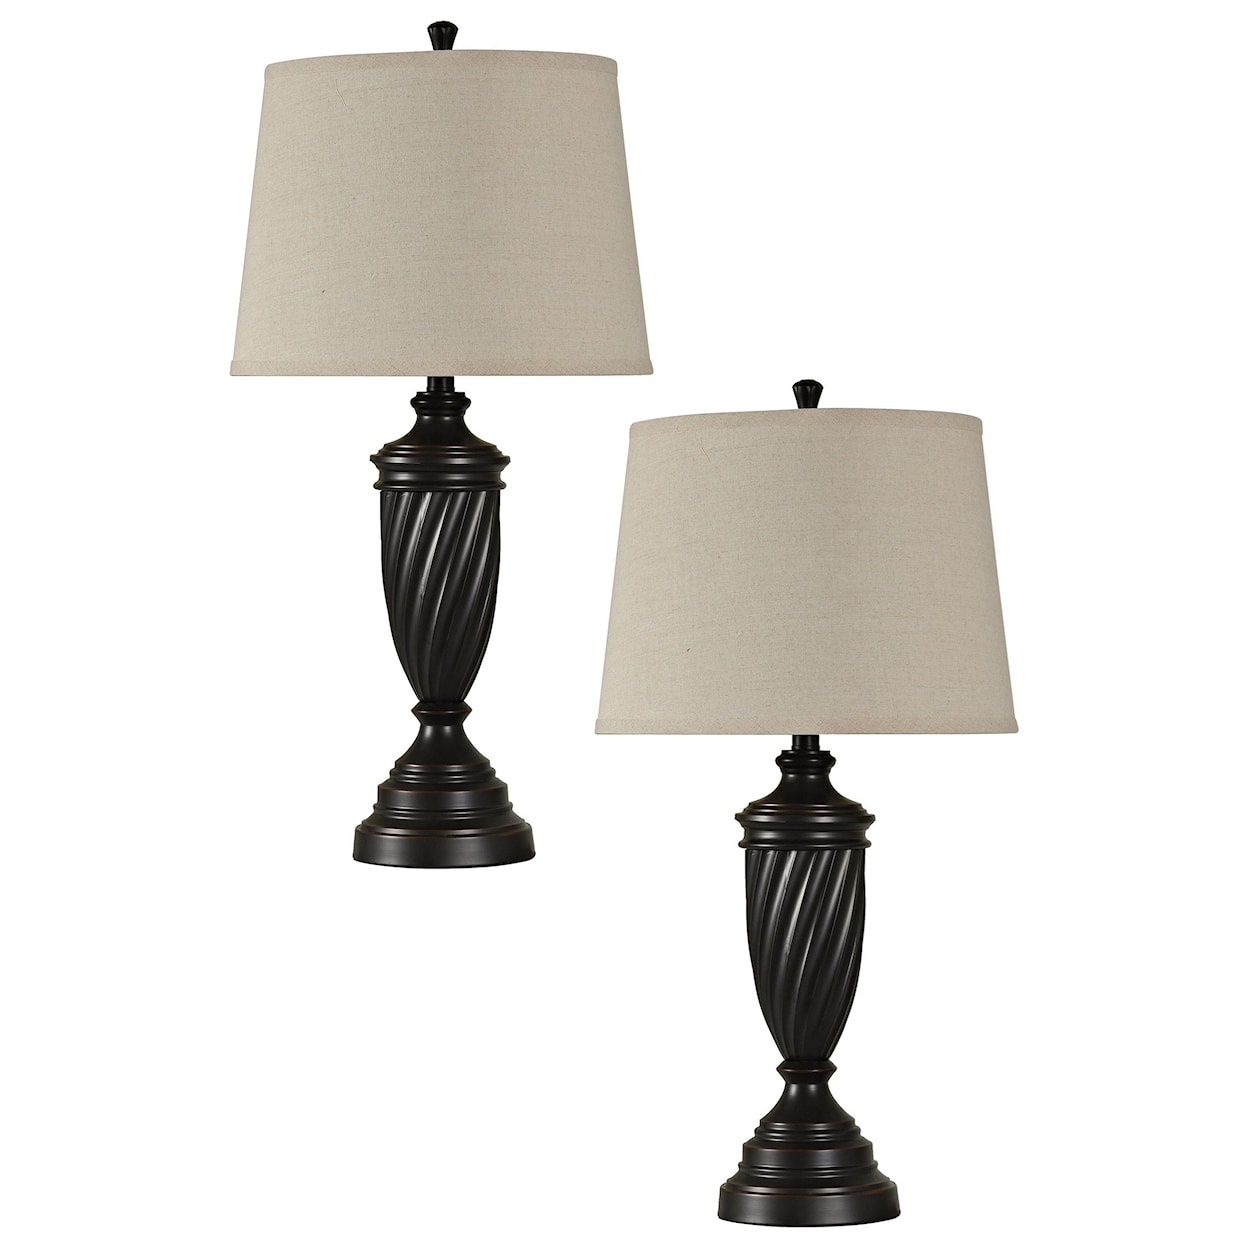 StyleCraft Lamps Pair of Table Lamps